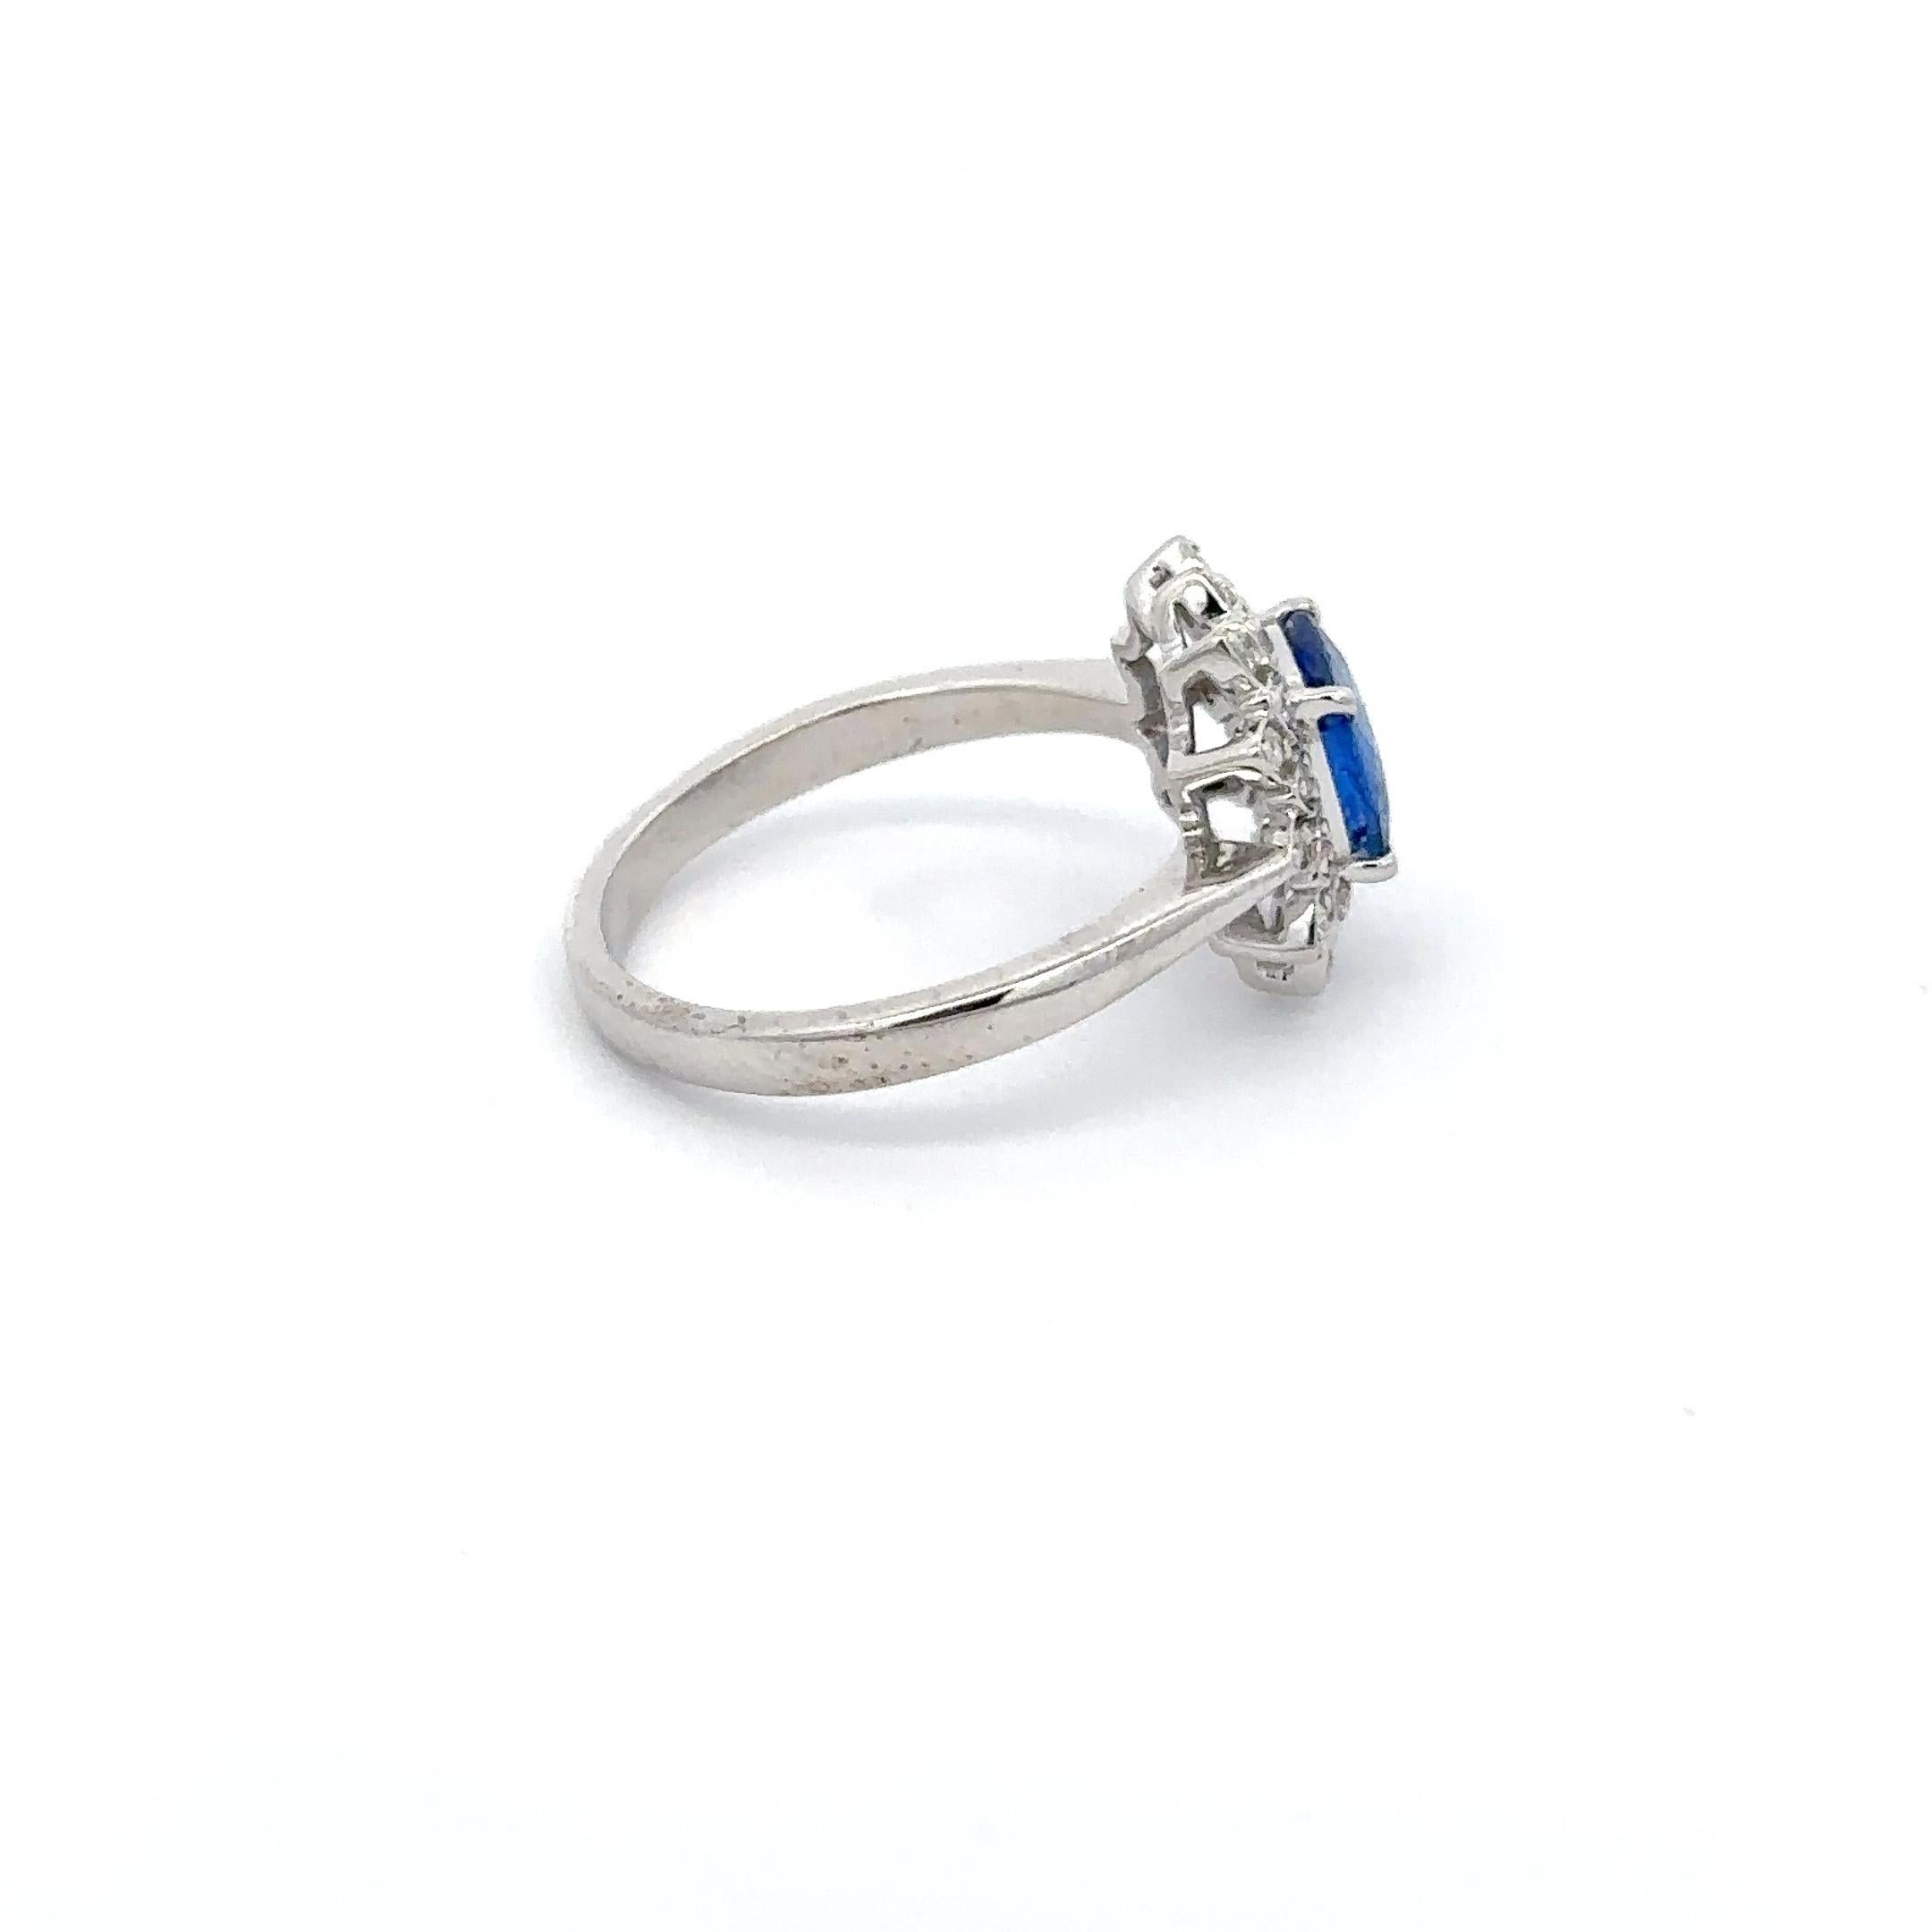 For Sale:  Genuine Blue Sapphire Halo Diamond Engagement Ring 18k Solid White Gold 7